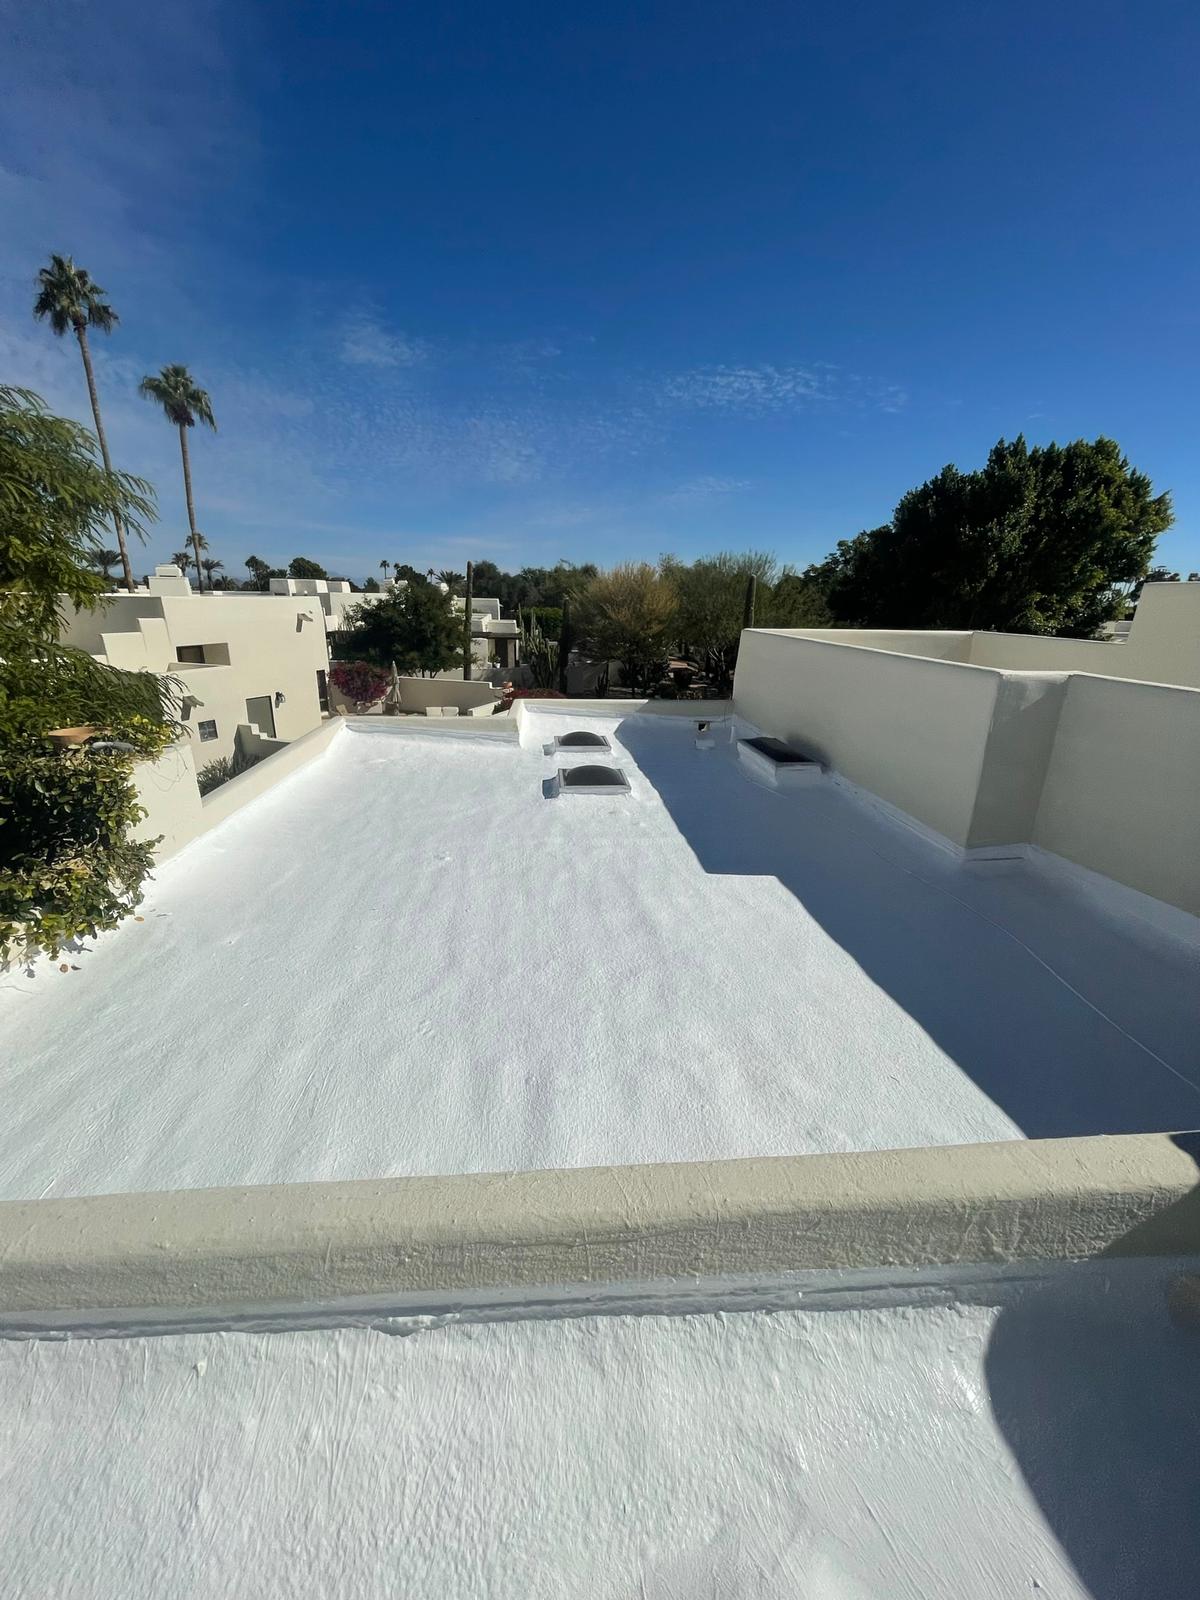 Spray foam roofing in the process of curing on an Estancia building.